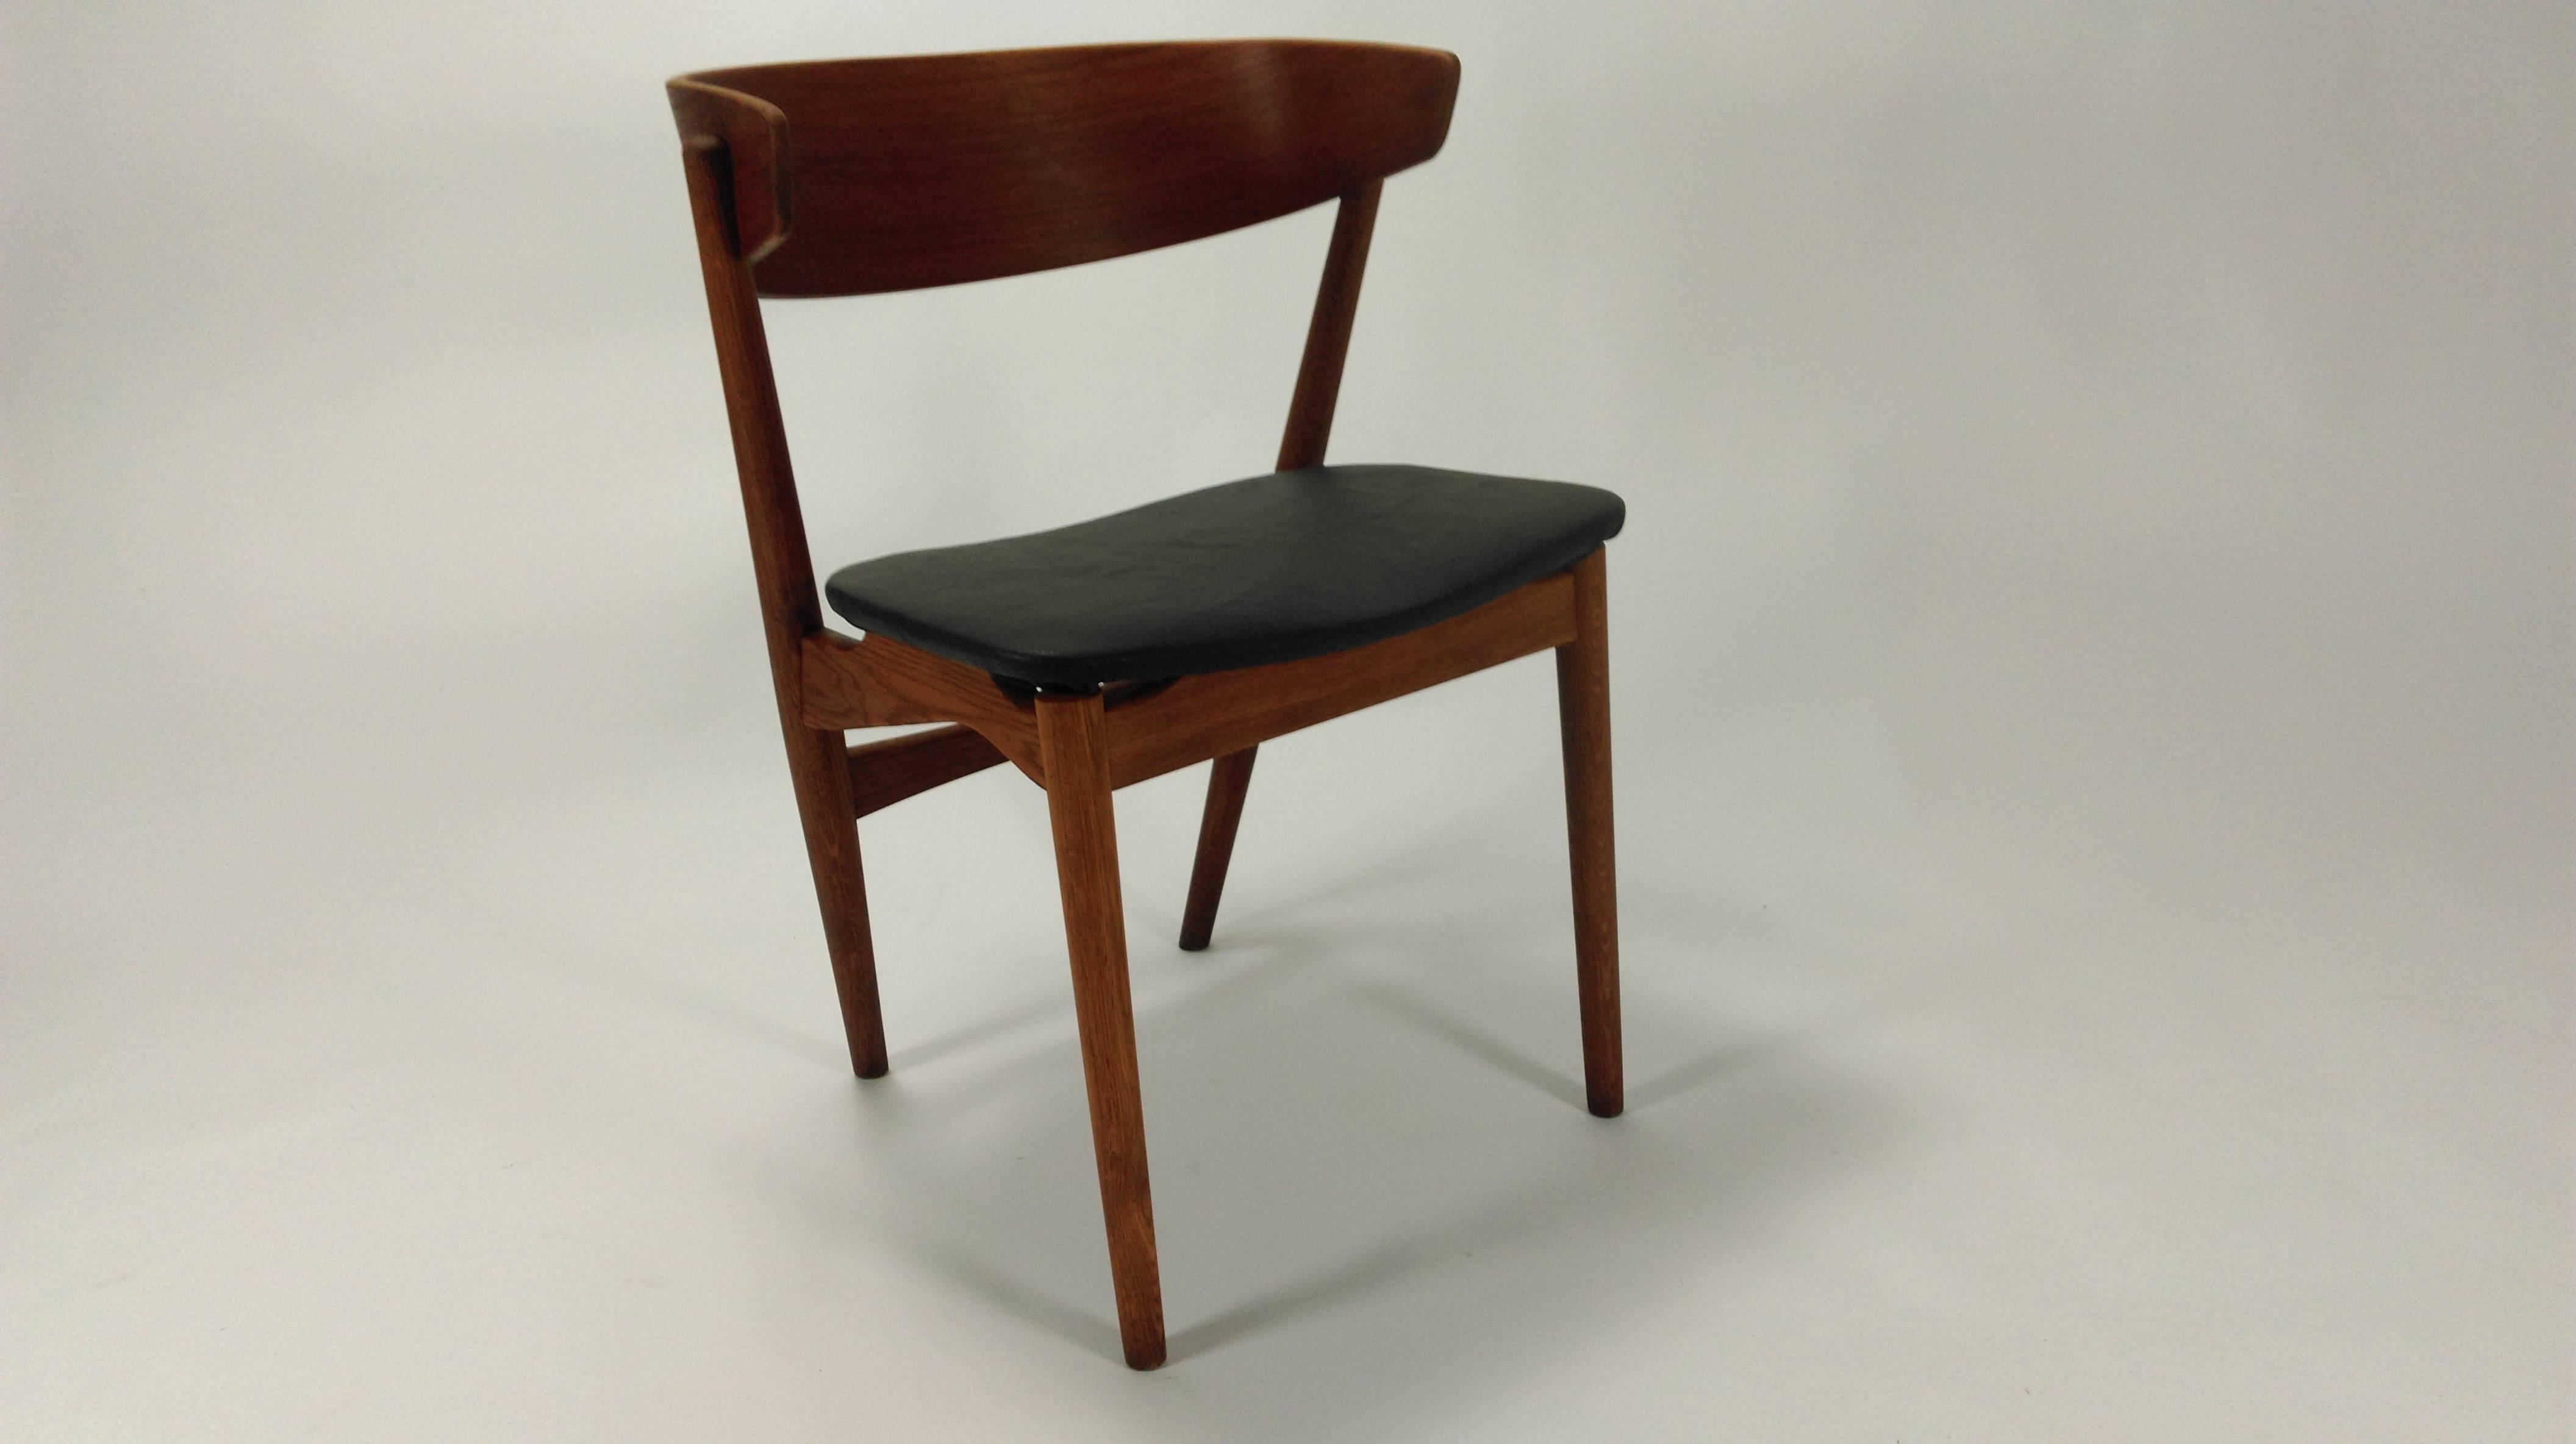 Pair of Fully restored Danish modern 1960s dining chairs by Helge Sibast.

The chairs feature organic lines from the extreme curved teak backrests, to the oak frame with it´s sculptural contouring on the side braces with the floating seat, to the